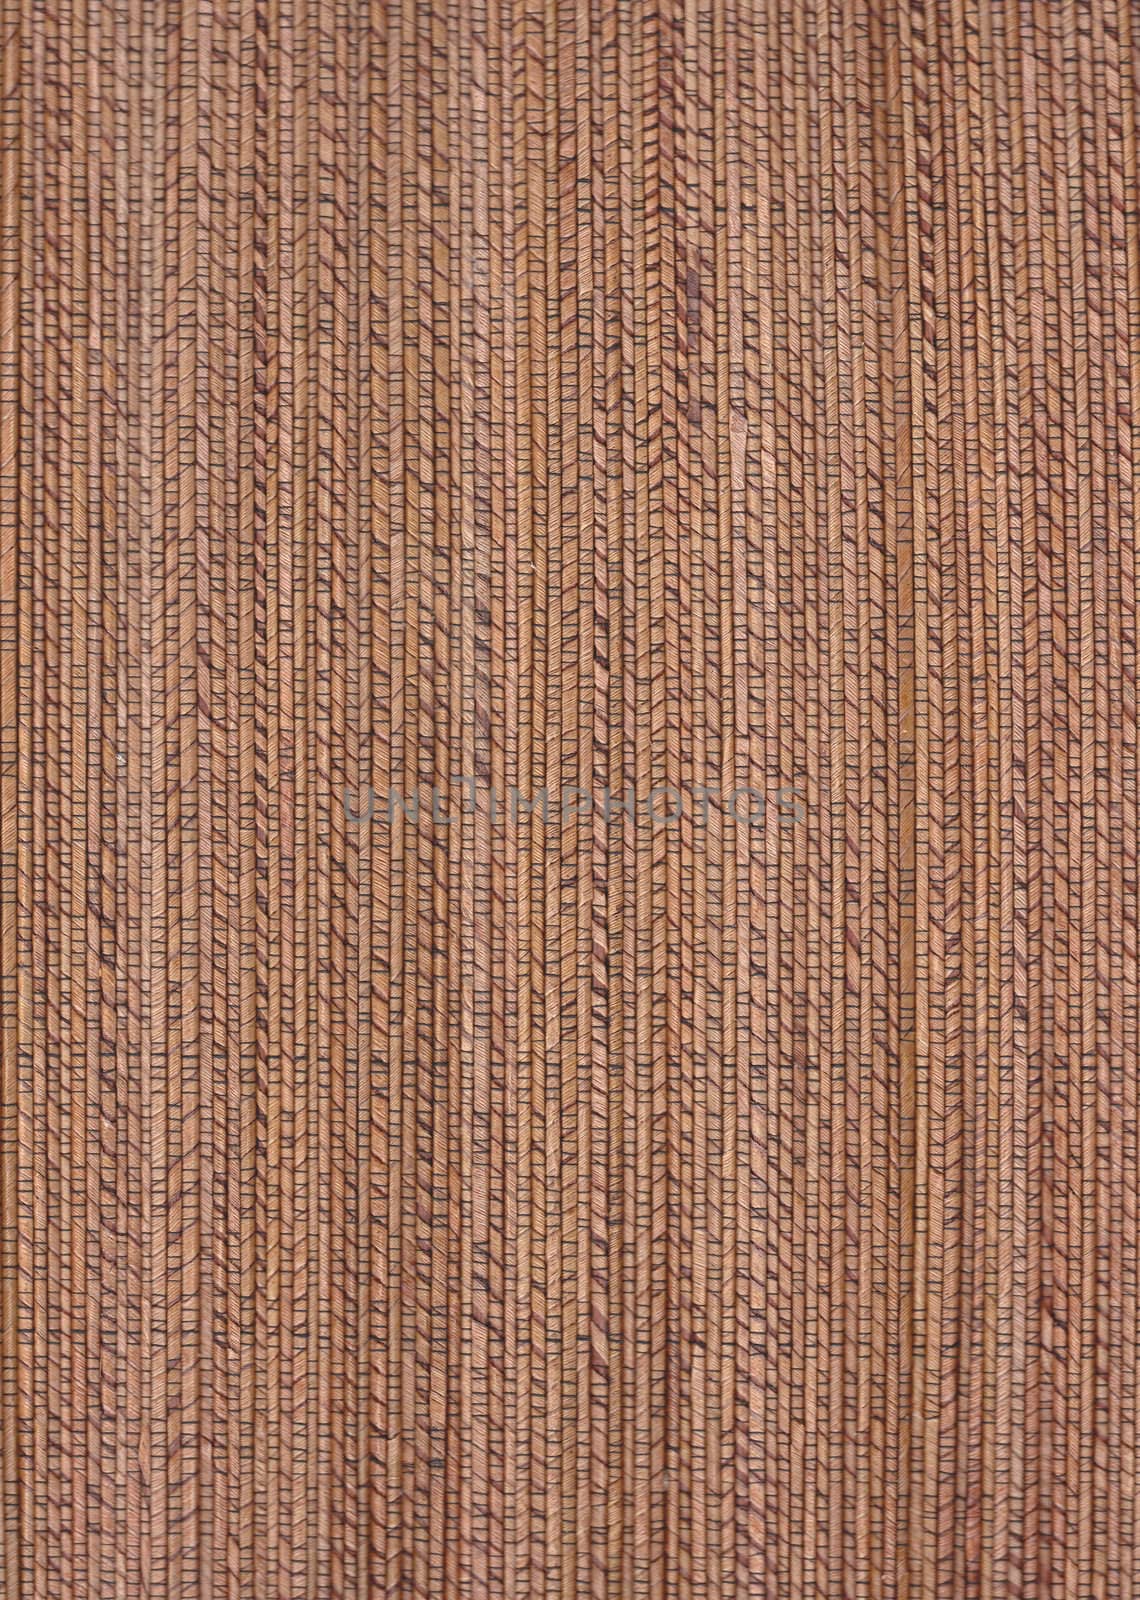 Old weathered wood texture - vintage design antique ancient by jeremywhat